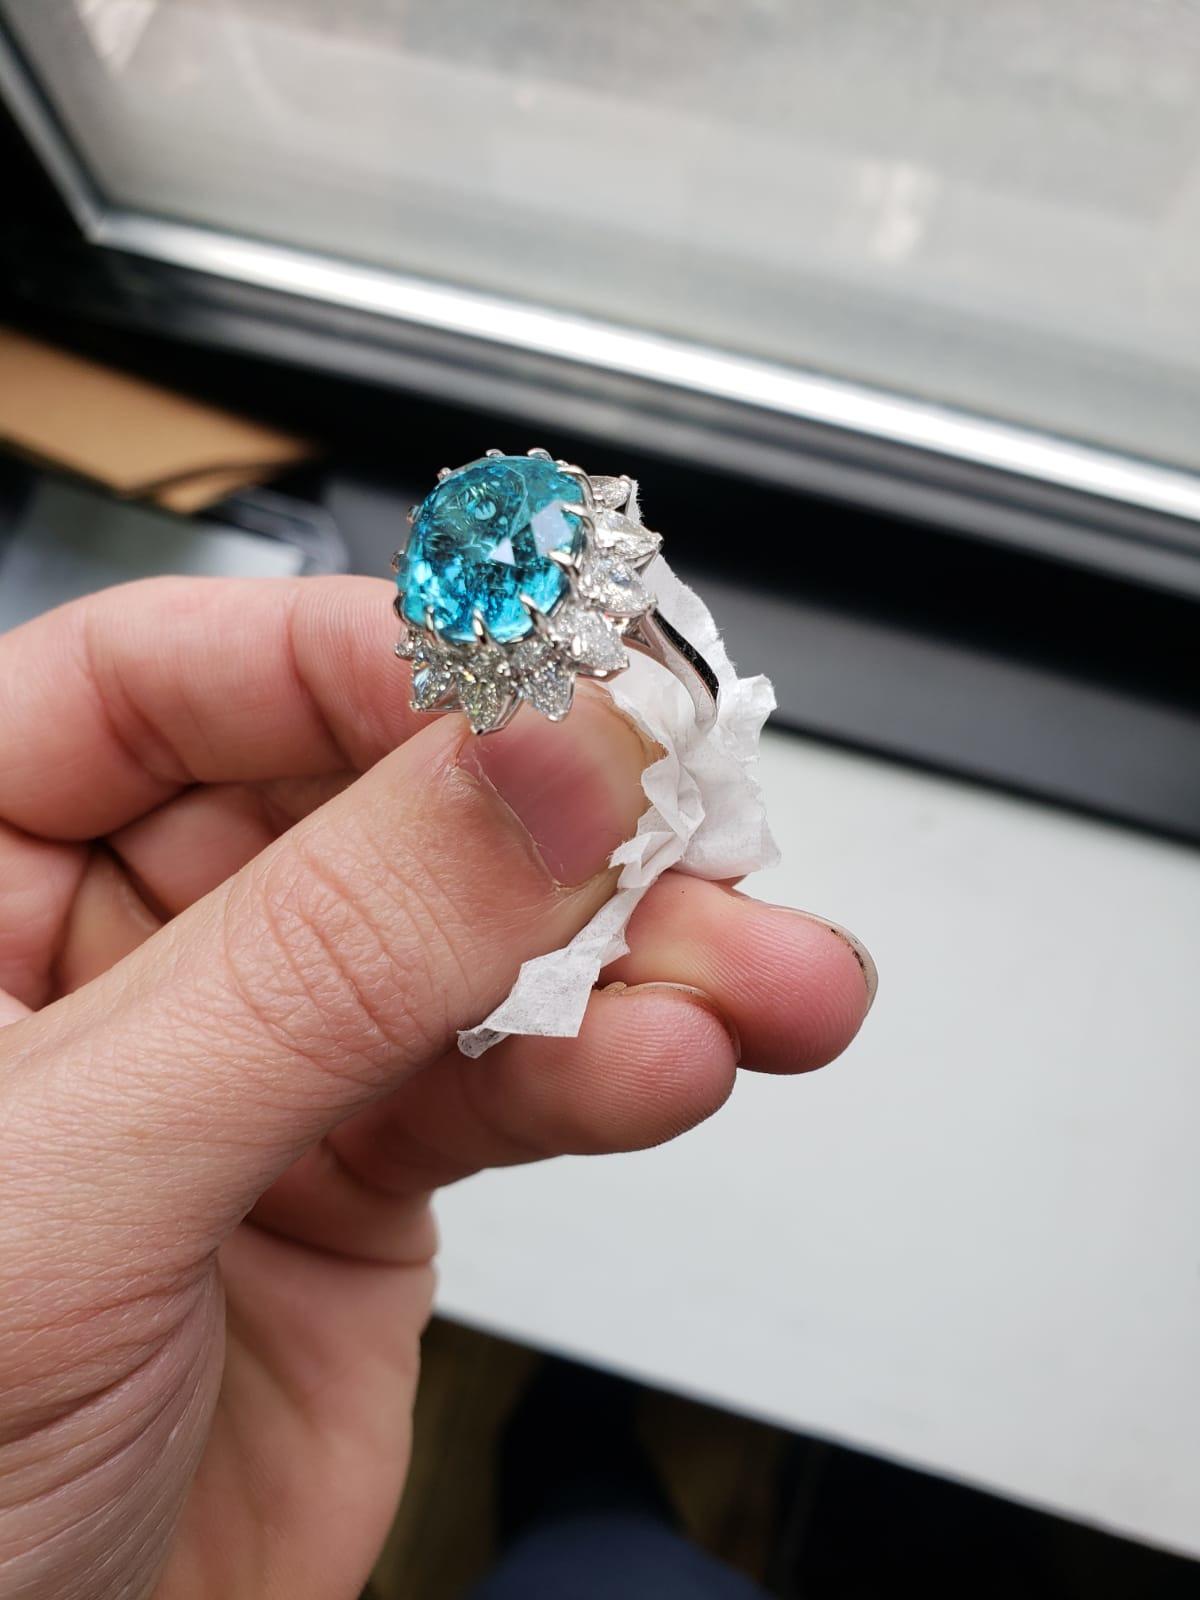 This stunning hand made ring has a superlative 8.25 carat cushion cut paraiba tourmaline that displays its brilliant aqua color in this contemporary and romantic ring. 

Paraiba tourmalines are among the most exciting gemstones in the world, and